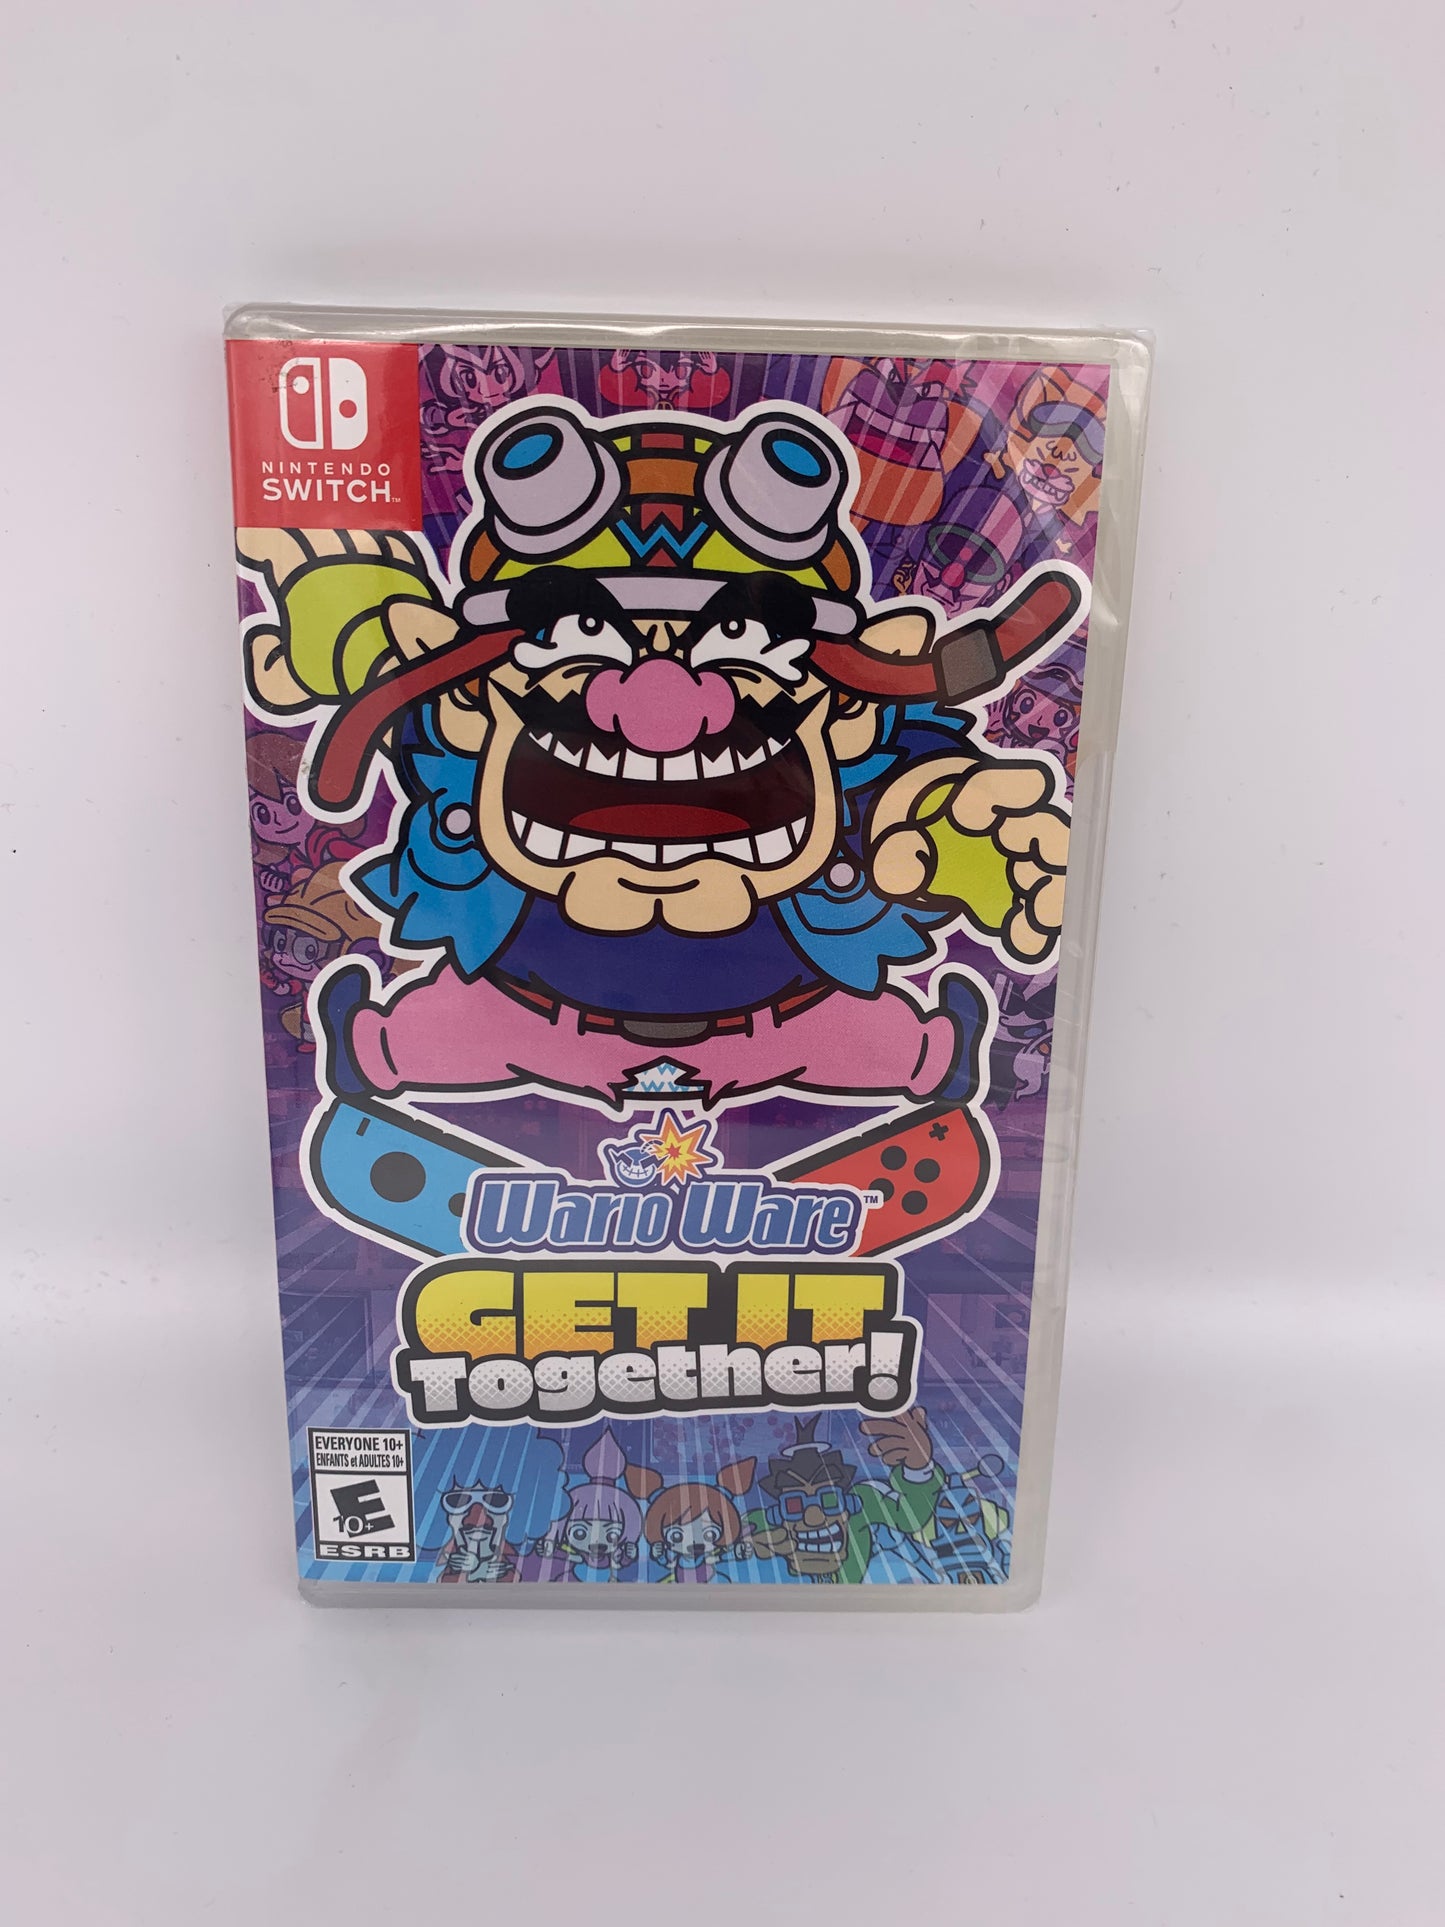 PiXEL-RETRO.COM : NINTENDO SWITCH NEW SEALED IN BOX COMPLETE MANUAL GAME NTSC WARIOWARE WARIO WARE GET IT TOGETHER